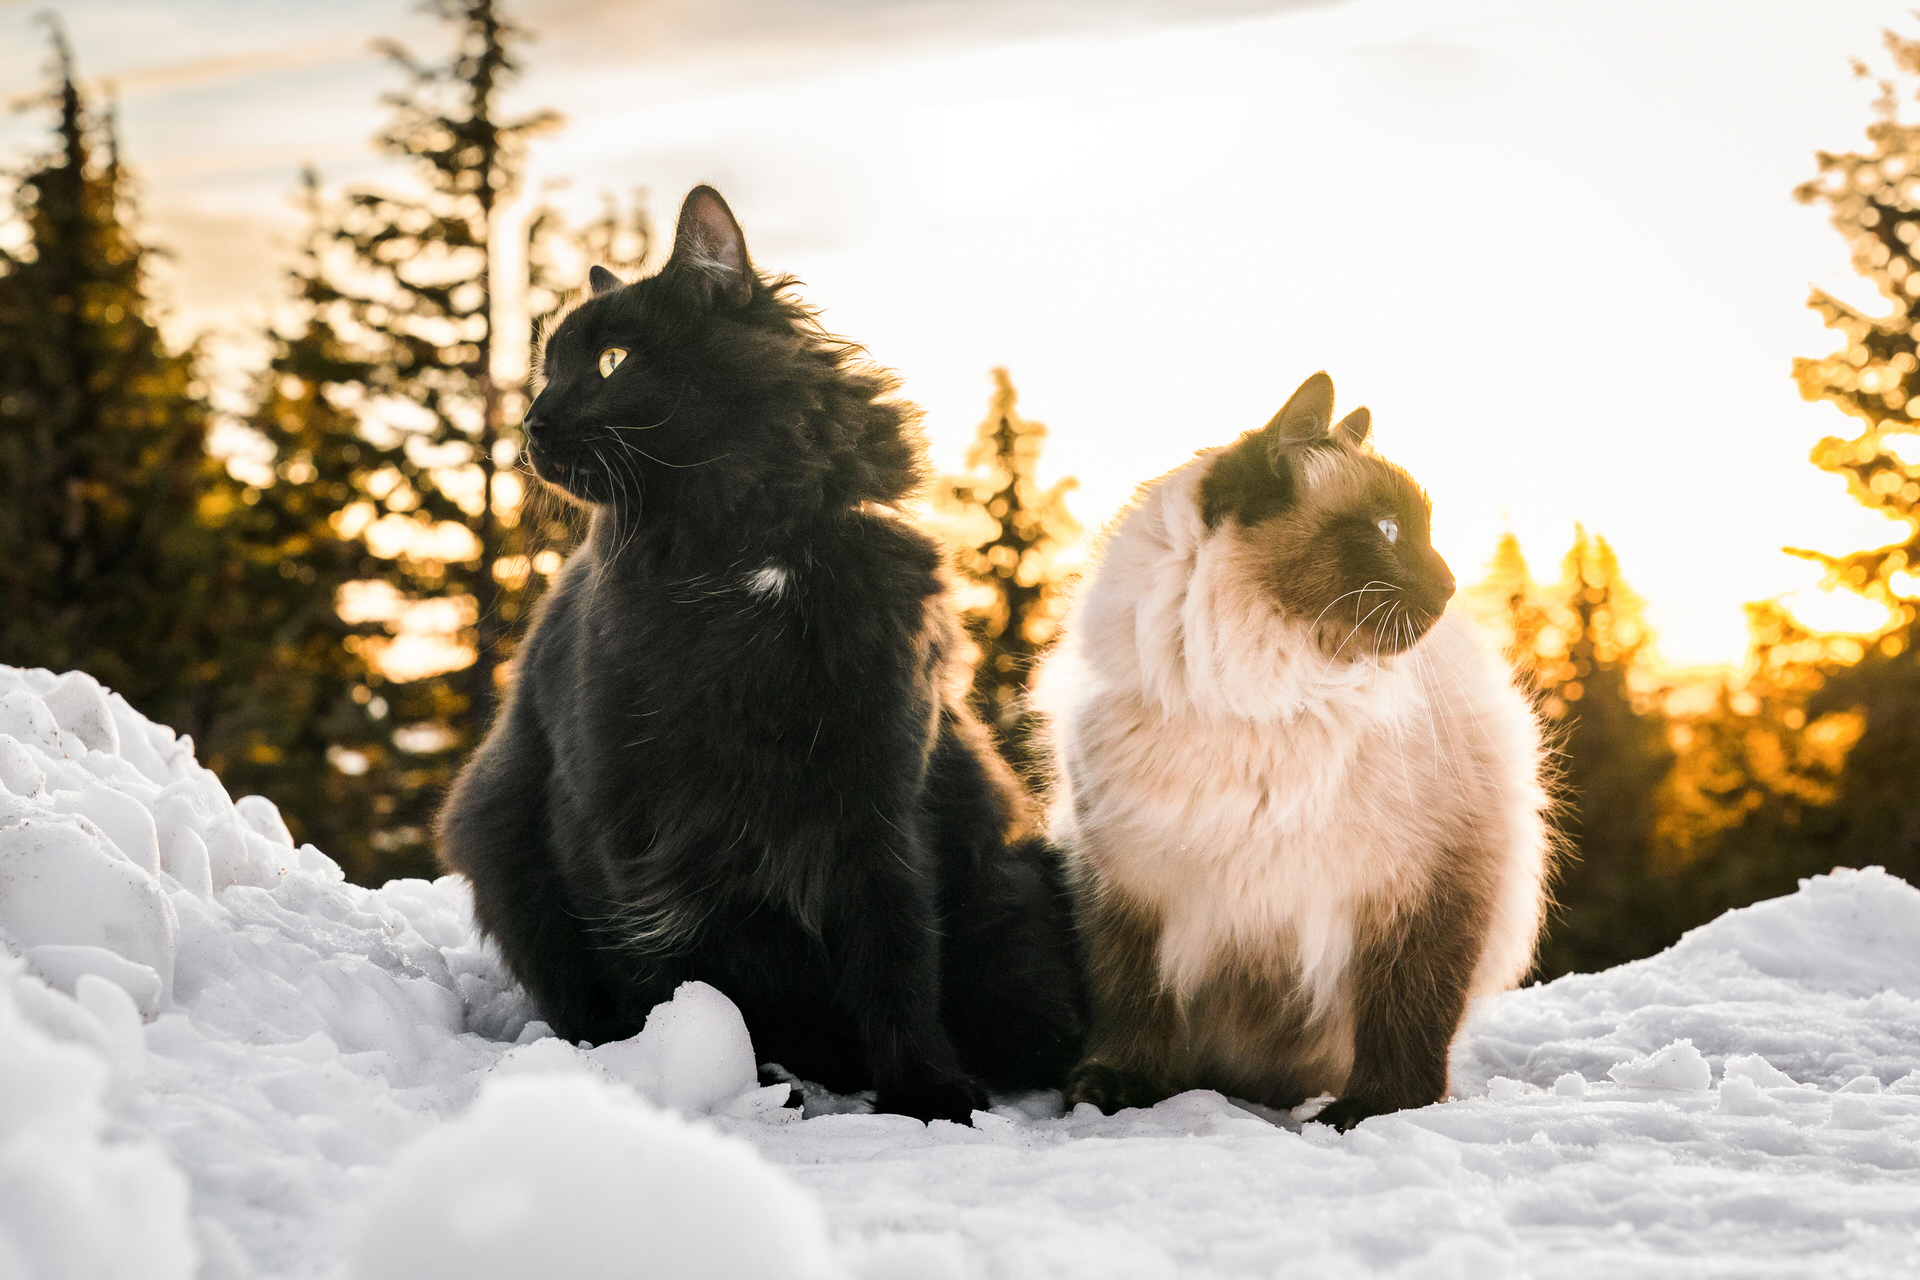 cats in the snow at sunset